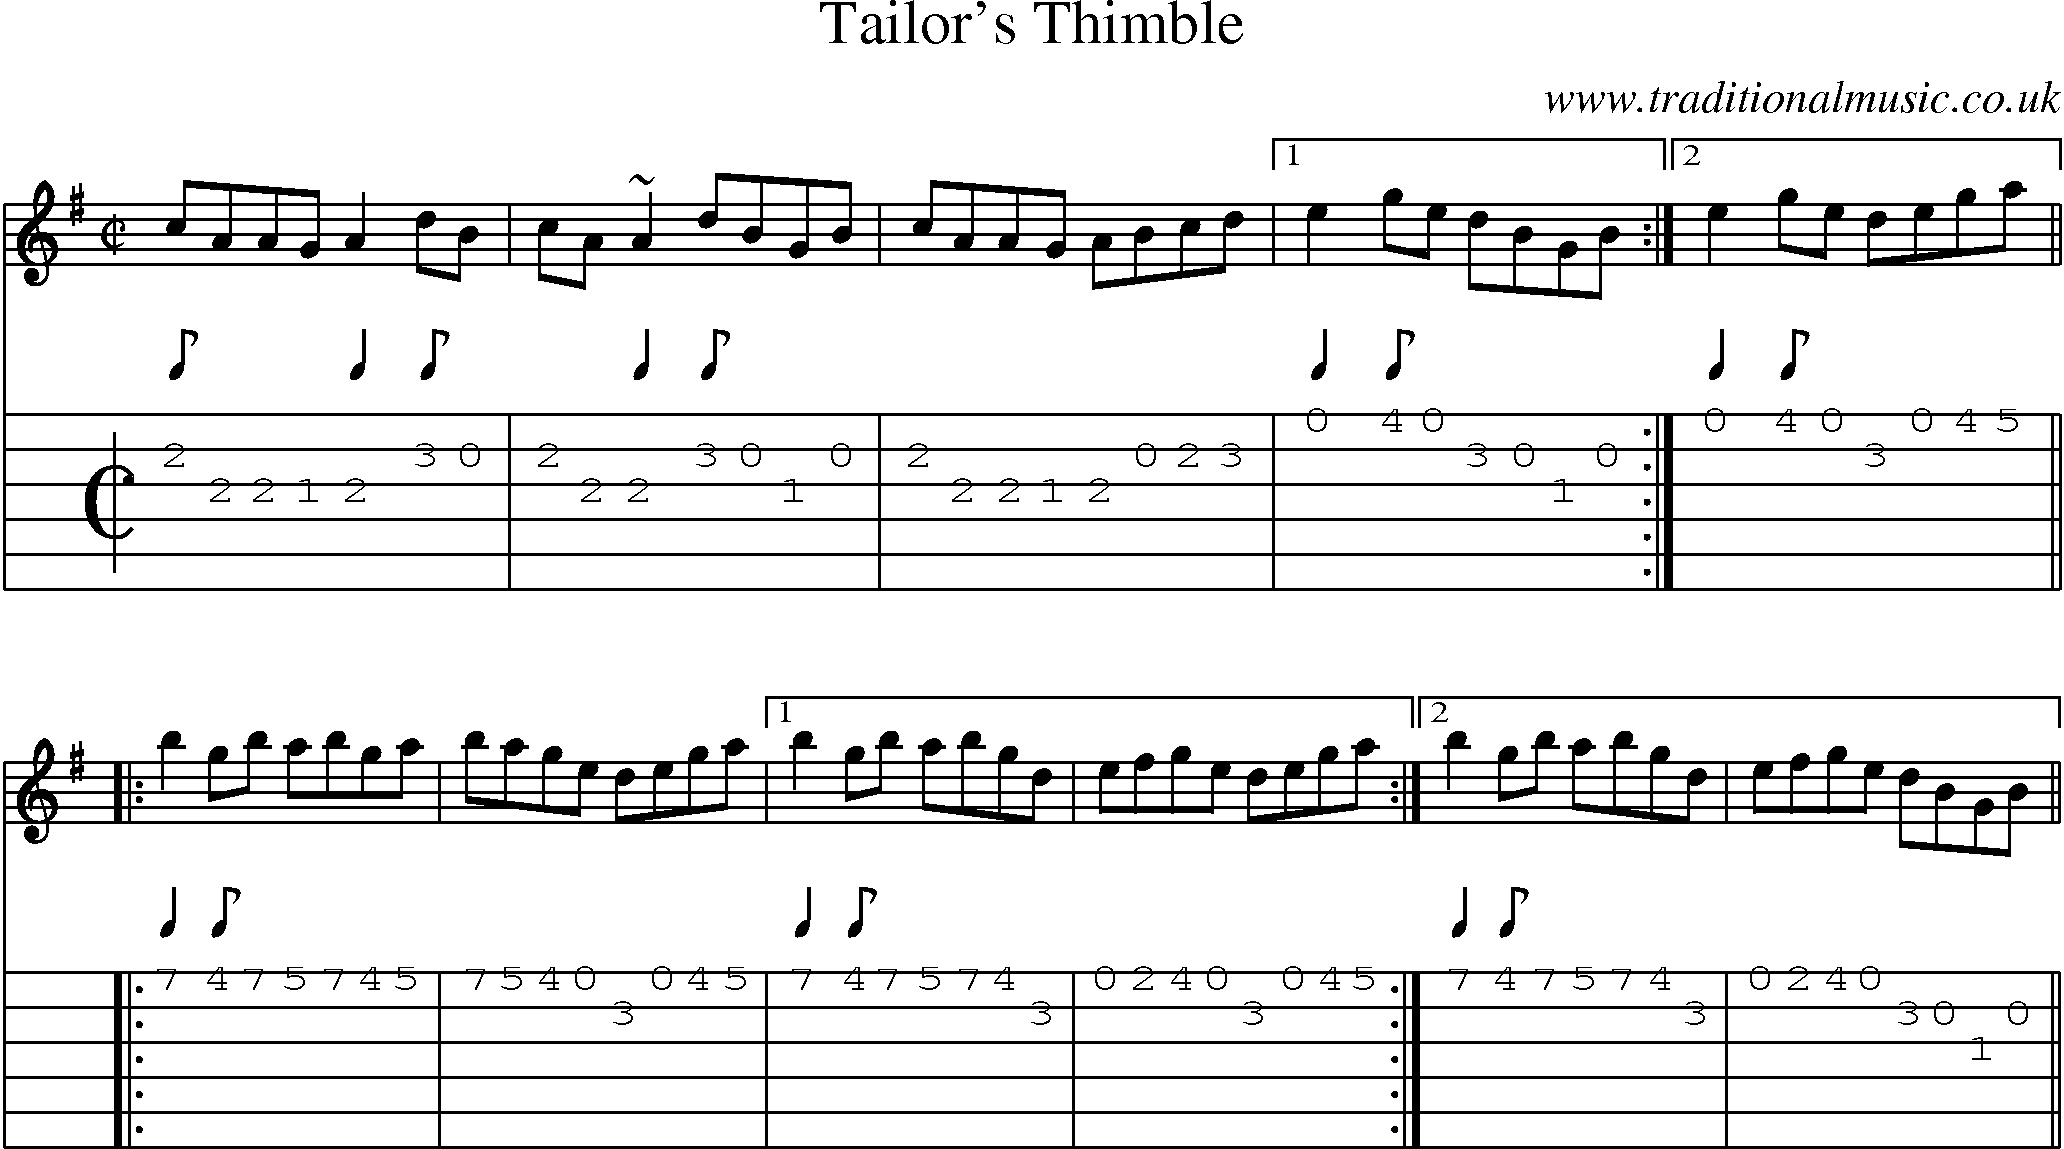 Music Score and Guitar Tabs for Tailors Thimble